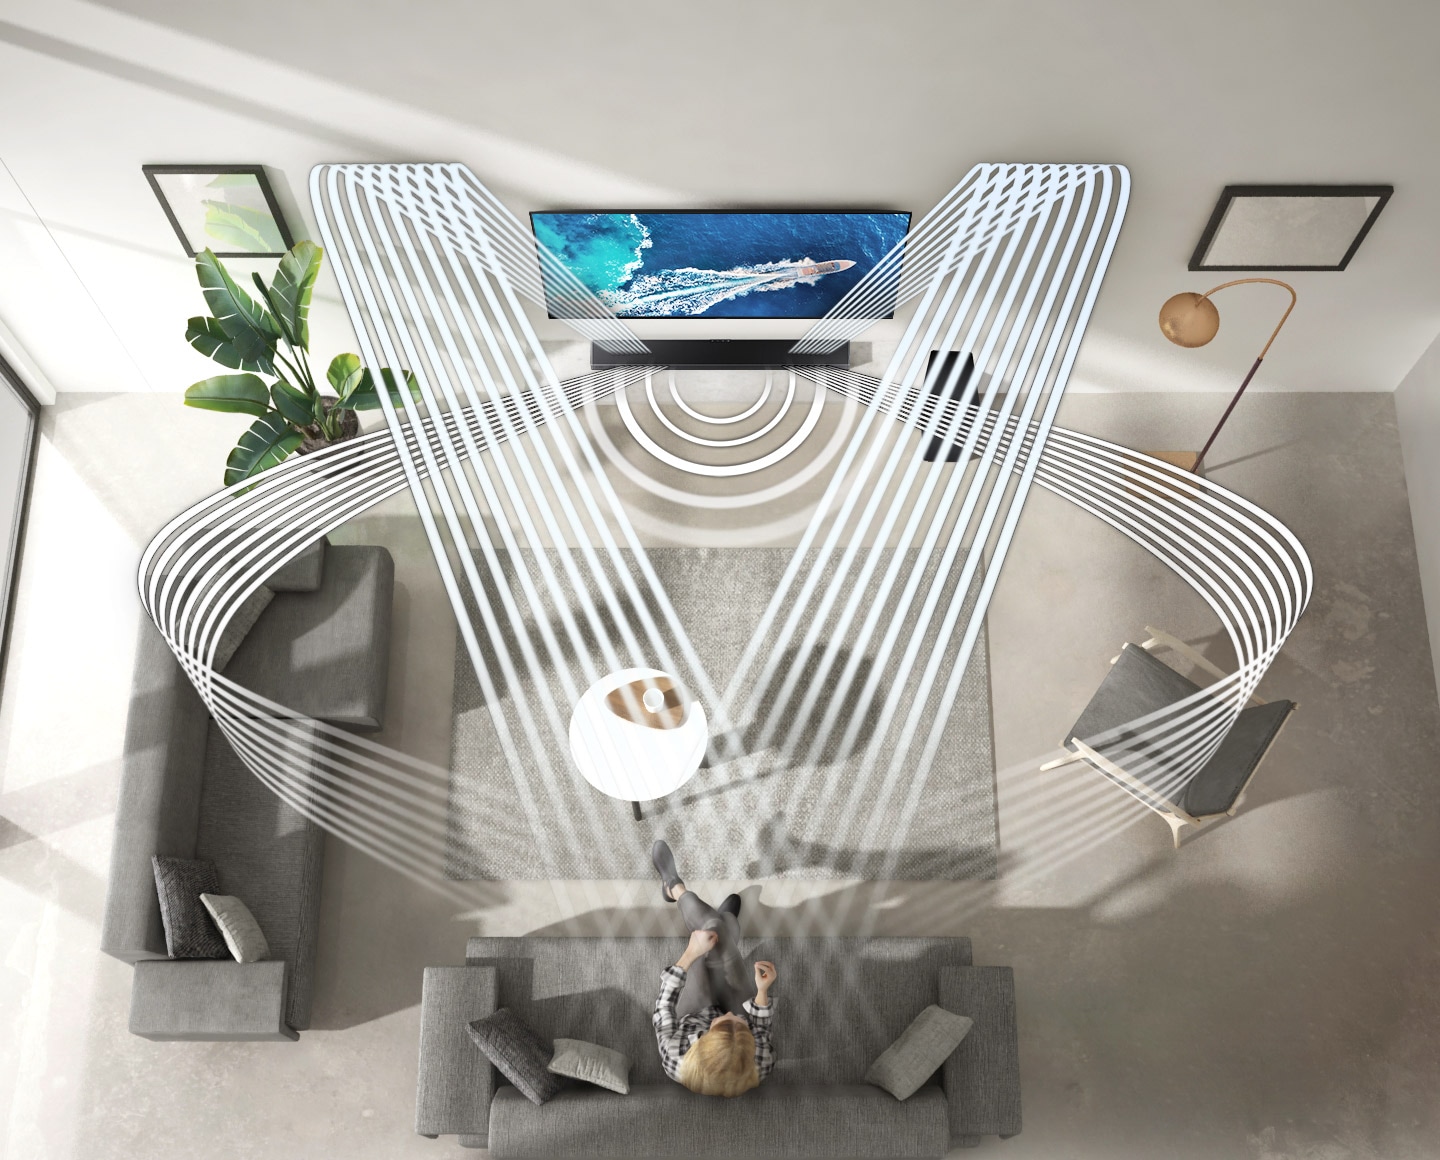 Description: Various soundwave graphics coming from soundbar illustrate how the woman enjoying QLED TV in her living room experiences sound created by Samsung Acoustic Beam. 2 soundwave graphics are up-firing from the top of the soundbar and toward the woman. 3 soundwave graphics are coming from the side and center of the soundbar and toward the woman.